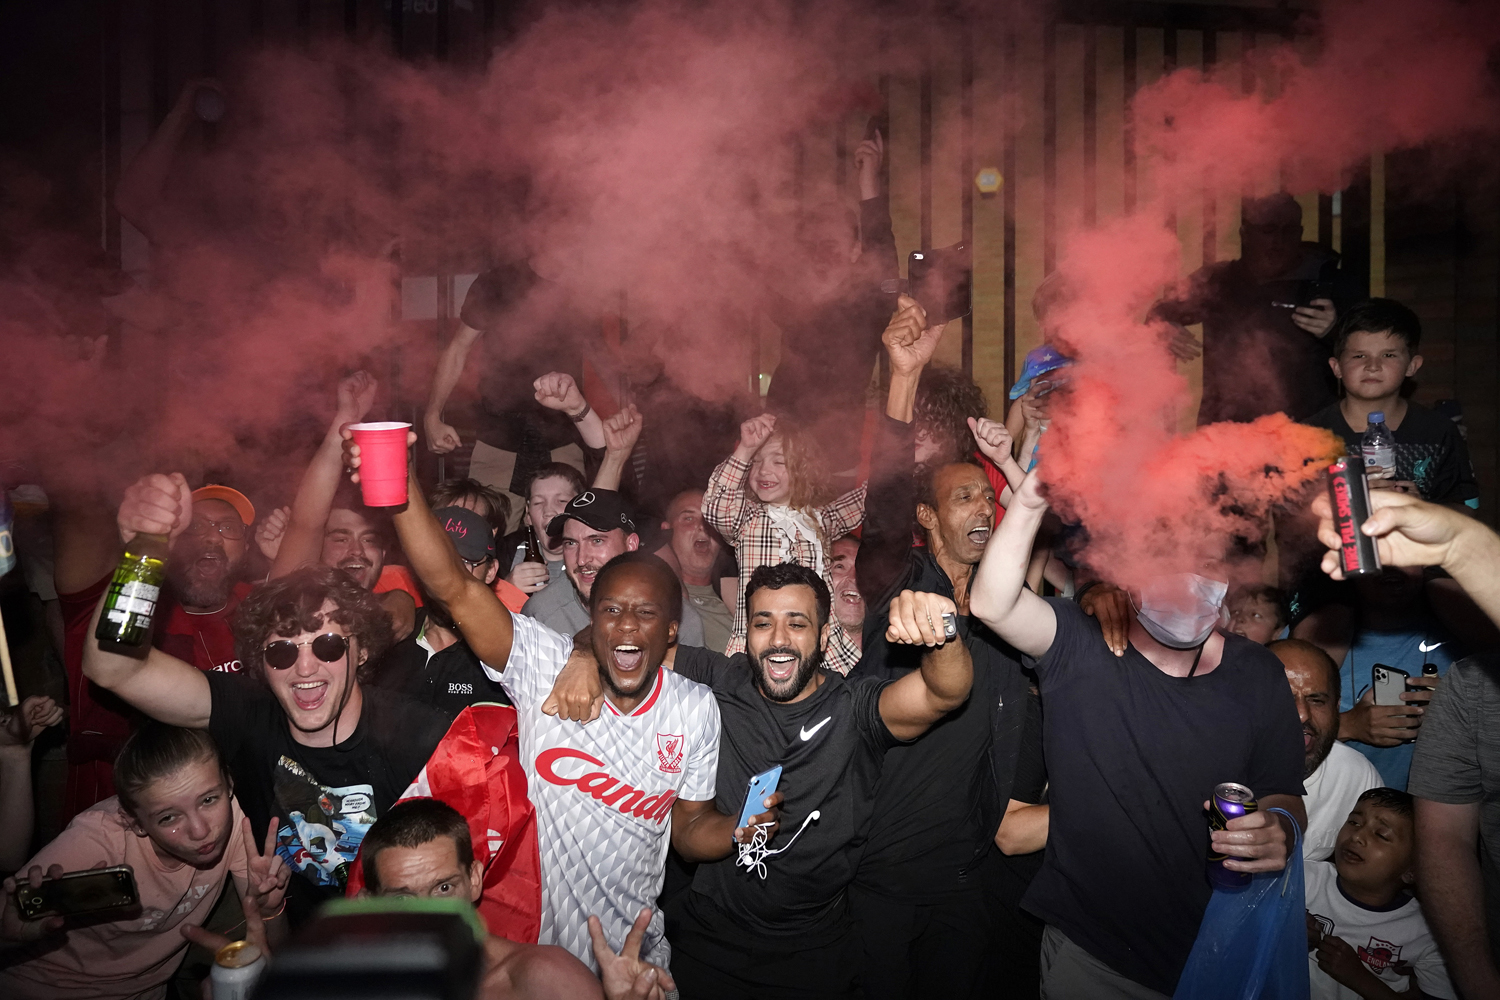 Liverpool fans celebrate Chelsea's victory against Manchester City, which ensured Liverpool of capturing its first Premier League title since 1990. | Christopher Furlong/Getty Images